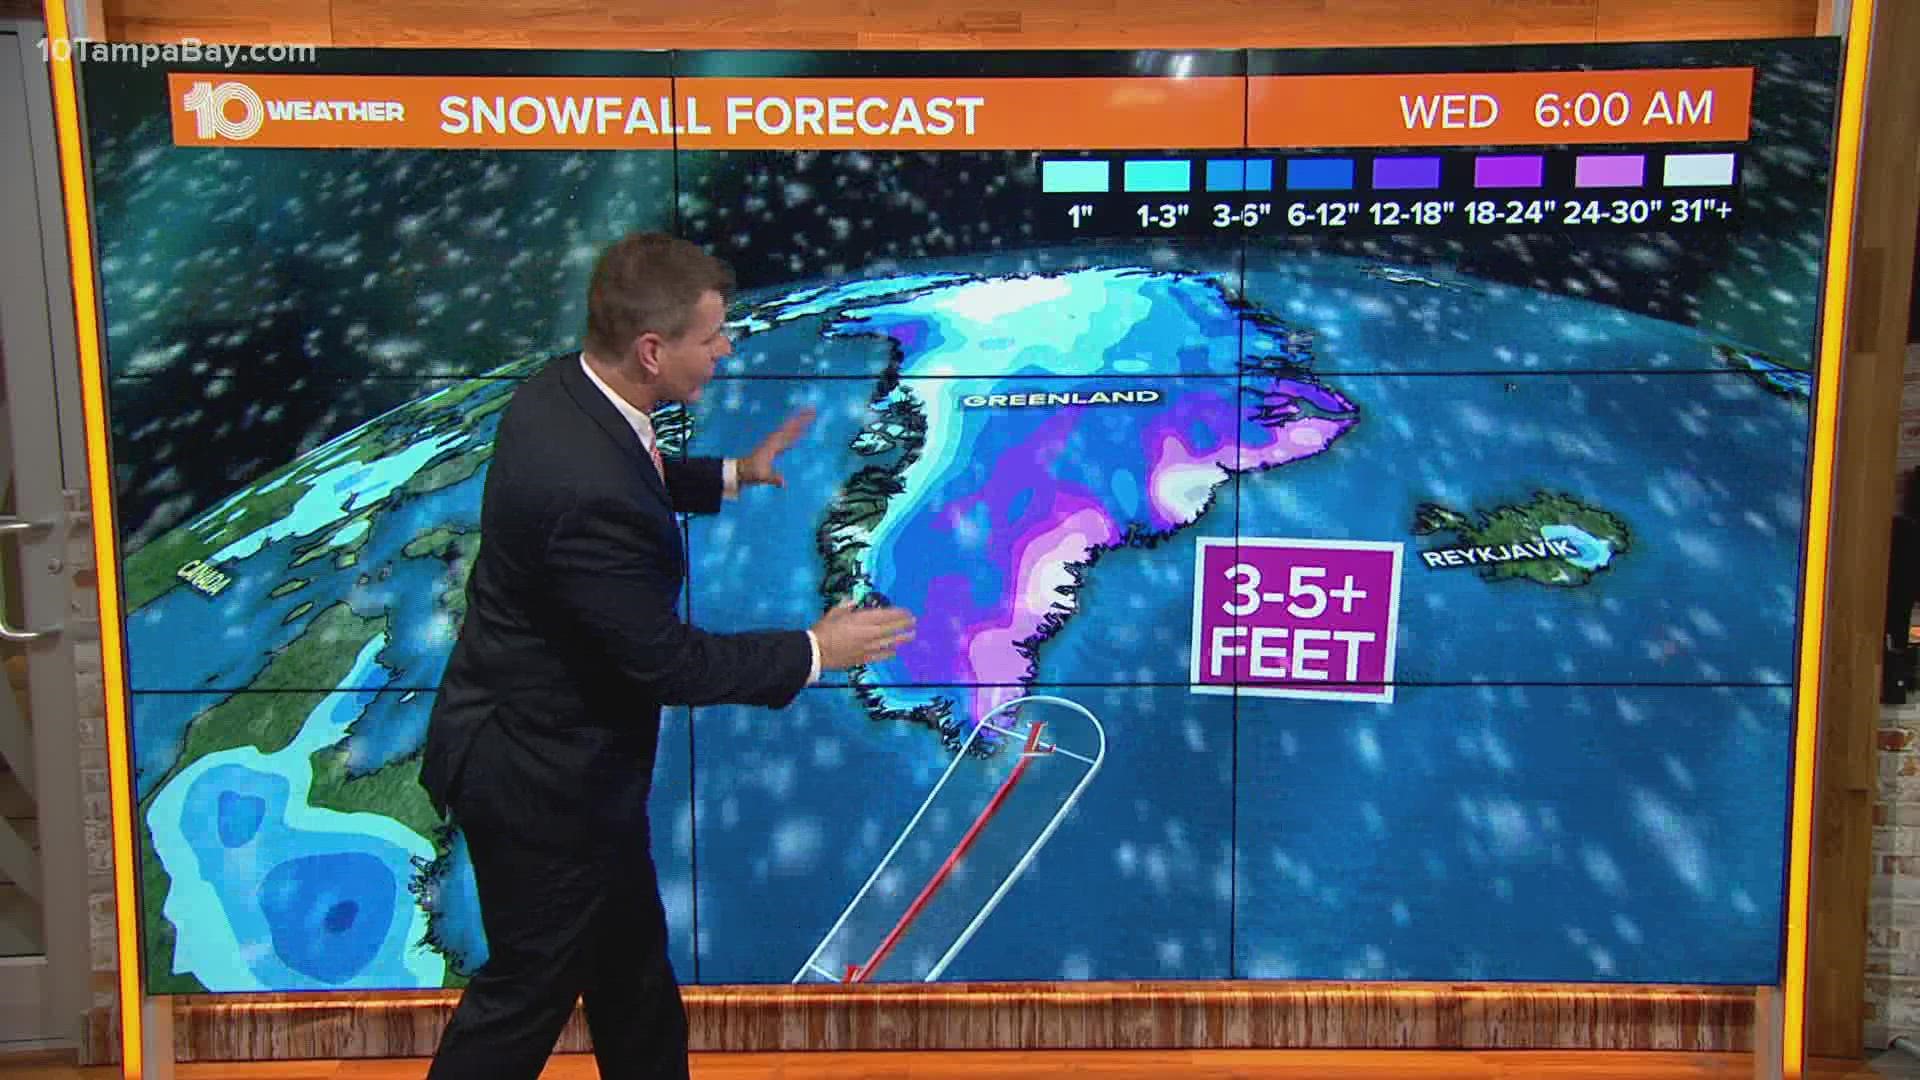 It’s unusual for this time of the year, as this powerful hurricane will bring three to five feet of snow.